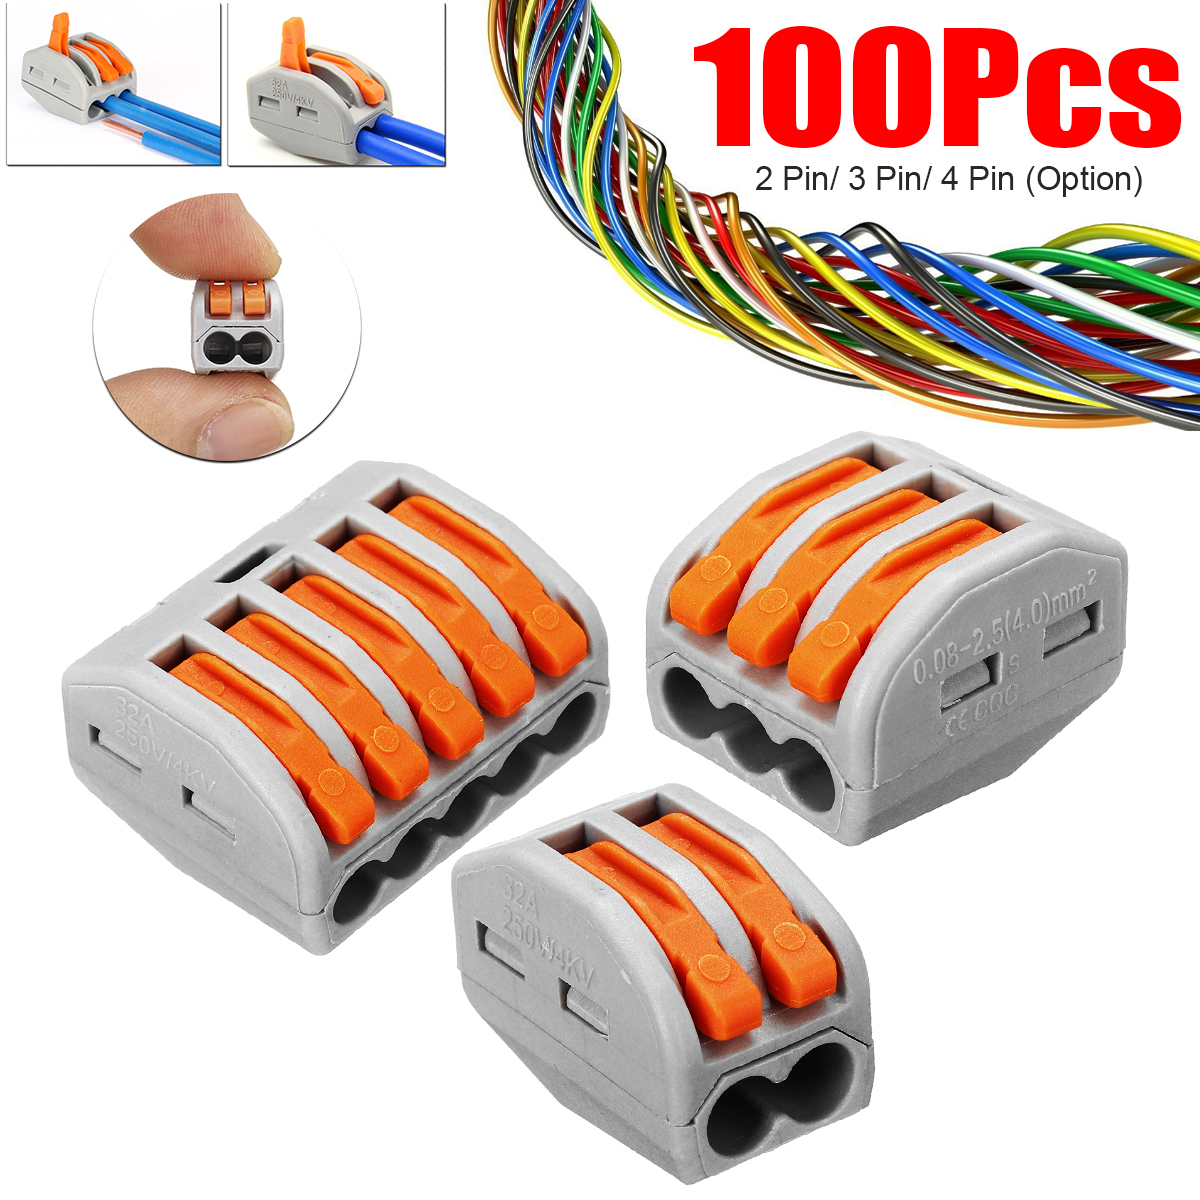 100PcsSet-Terminal-Block-Reusable-Electric-Cable-Wire-Connector-235-Pin-1487164-1